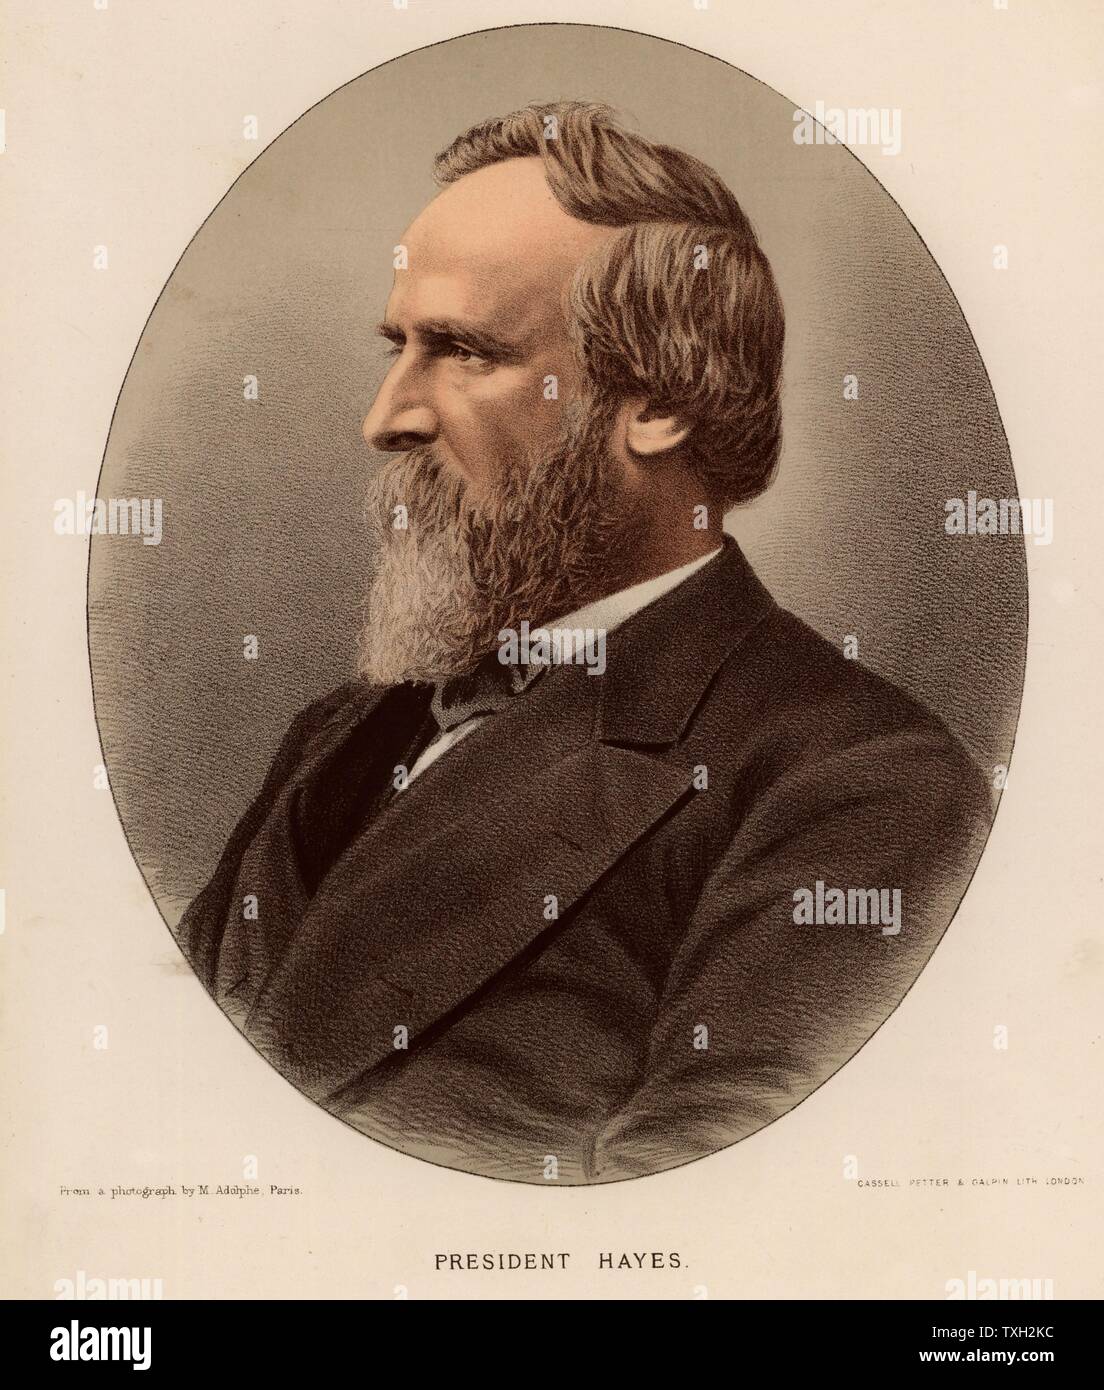 Rutherford Birchard Hayes (1822-1893) American Republican statesman, 19th President of the USA (1877-1881). From 'The Modern Portrait Gallery' (London, c1880). Tinted lithograph. Stock Photo